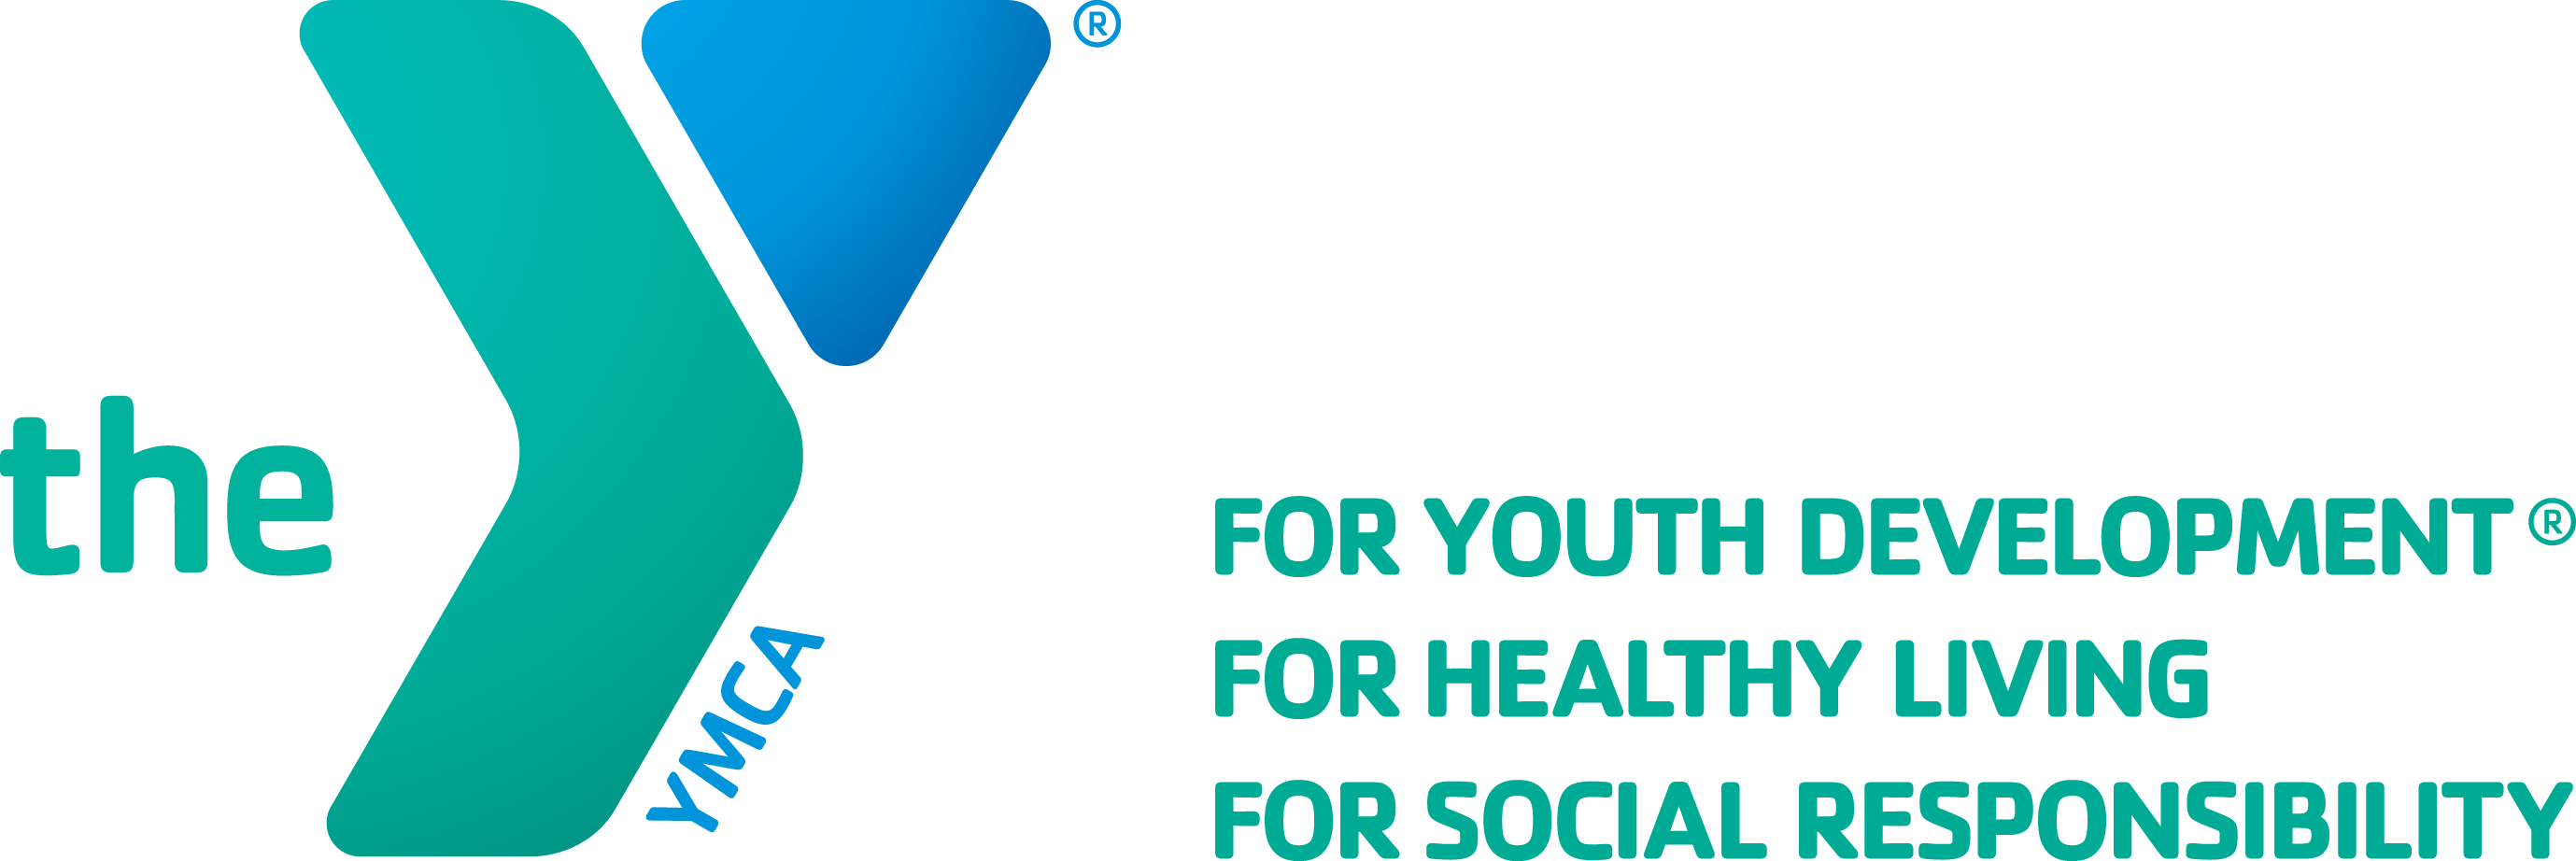 YMCA For Youth Development | For Healthy Living | For Social Responsibility